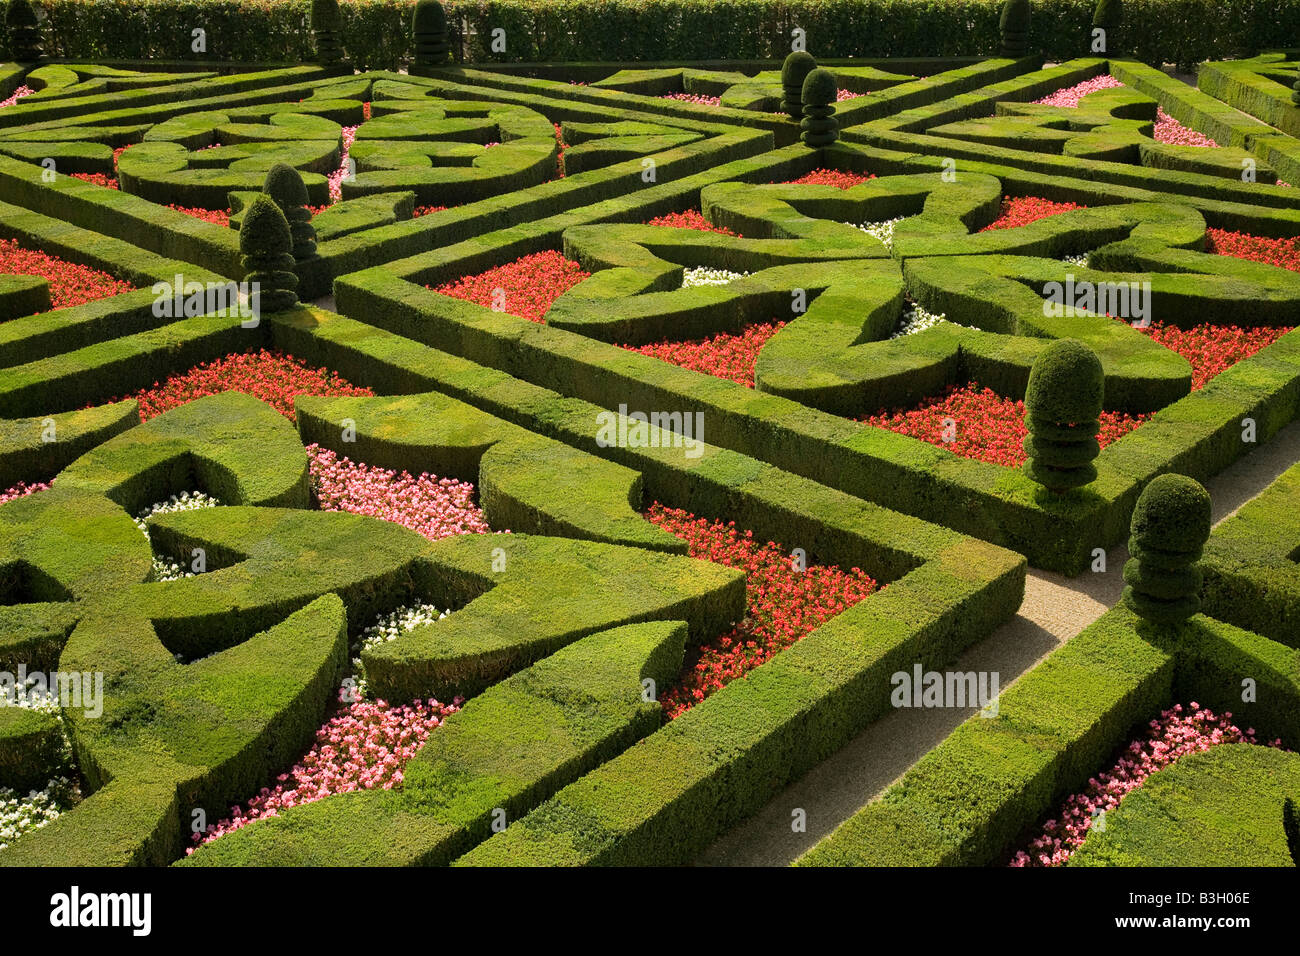 Clockwise from top Basque, Maltese and Languedoc crosses in the parterres of the love garden, Chateau Villandry, Loire Valley Stock Photo